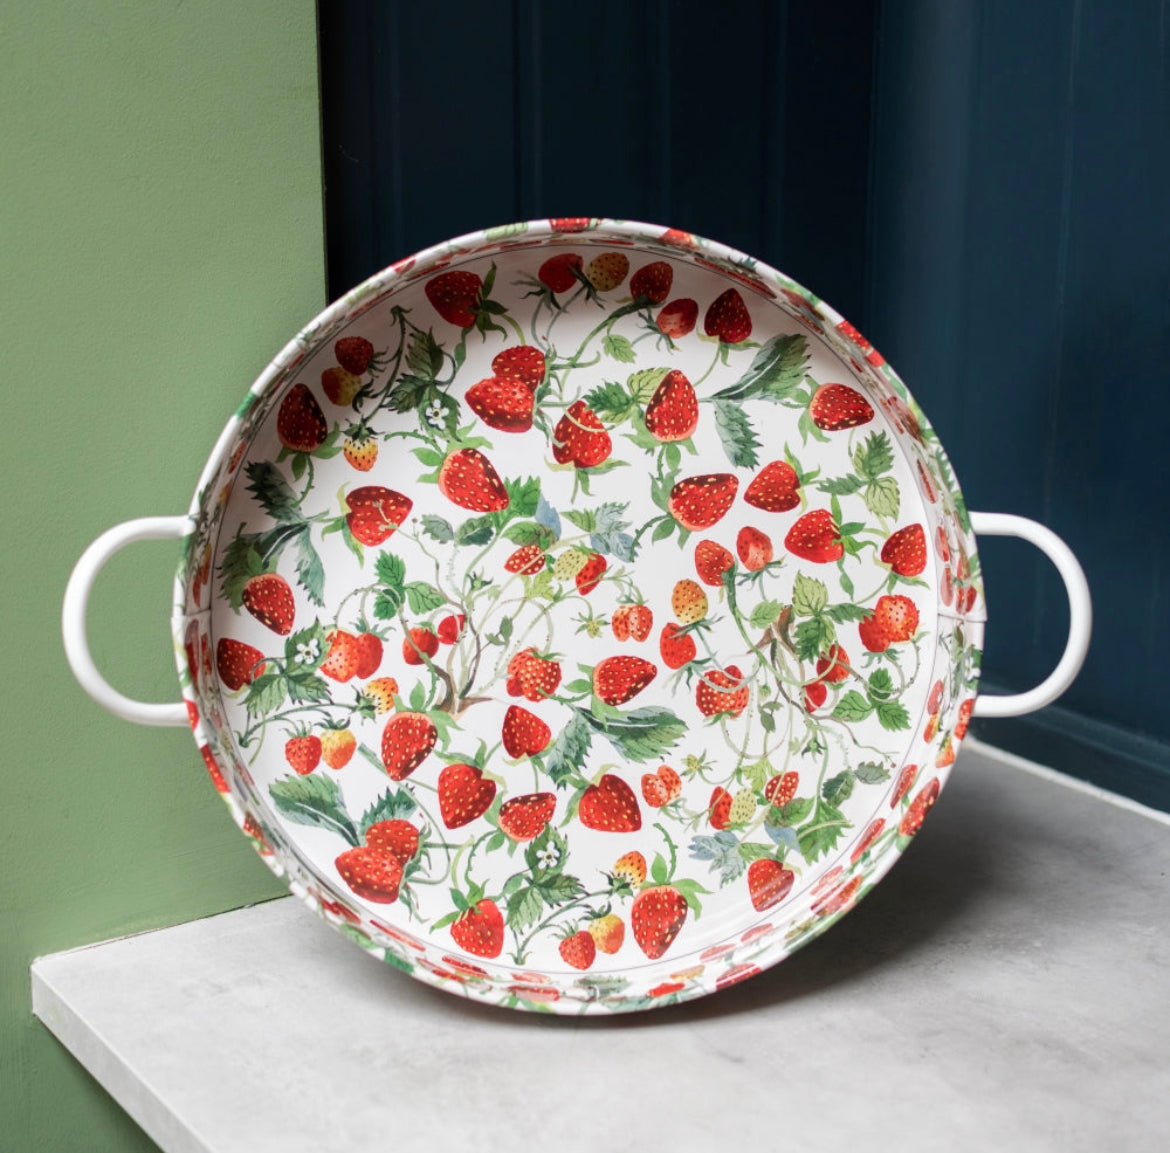 Large Strawberries Tin Tray with handles - The Bristol Artisan Handmade Sustainable Gifts and Homewares.